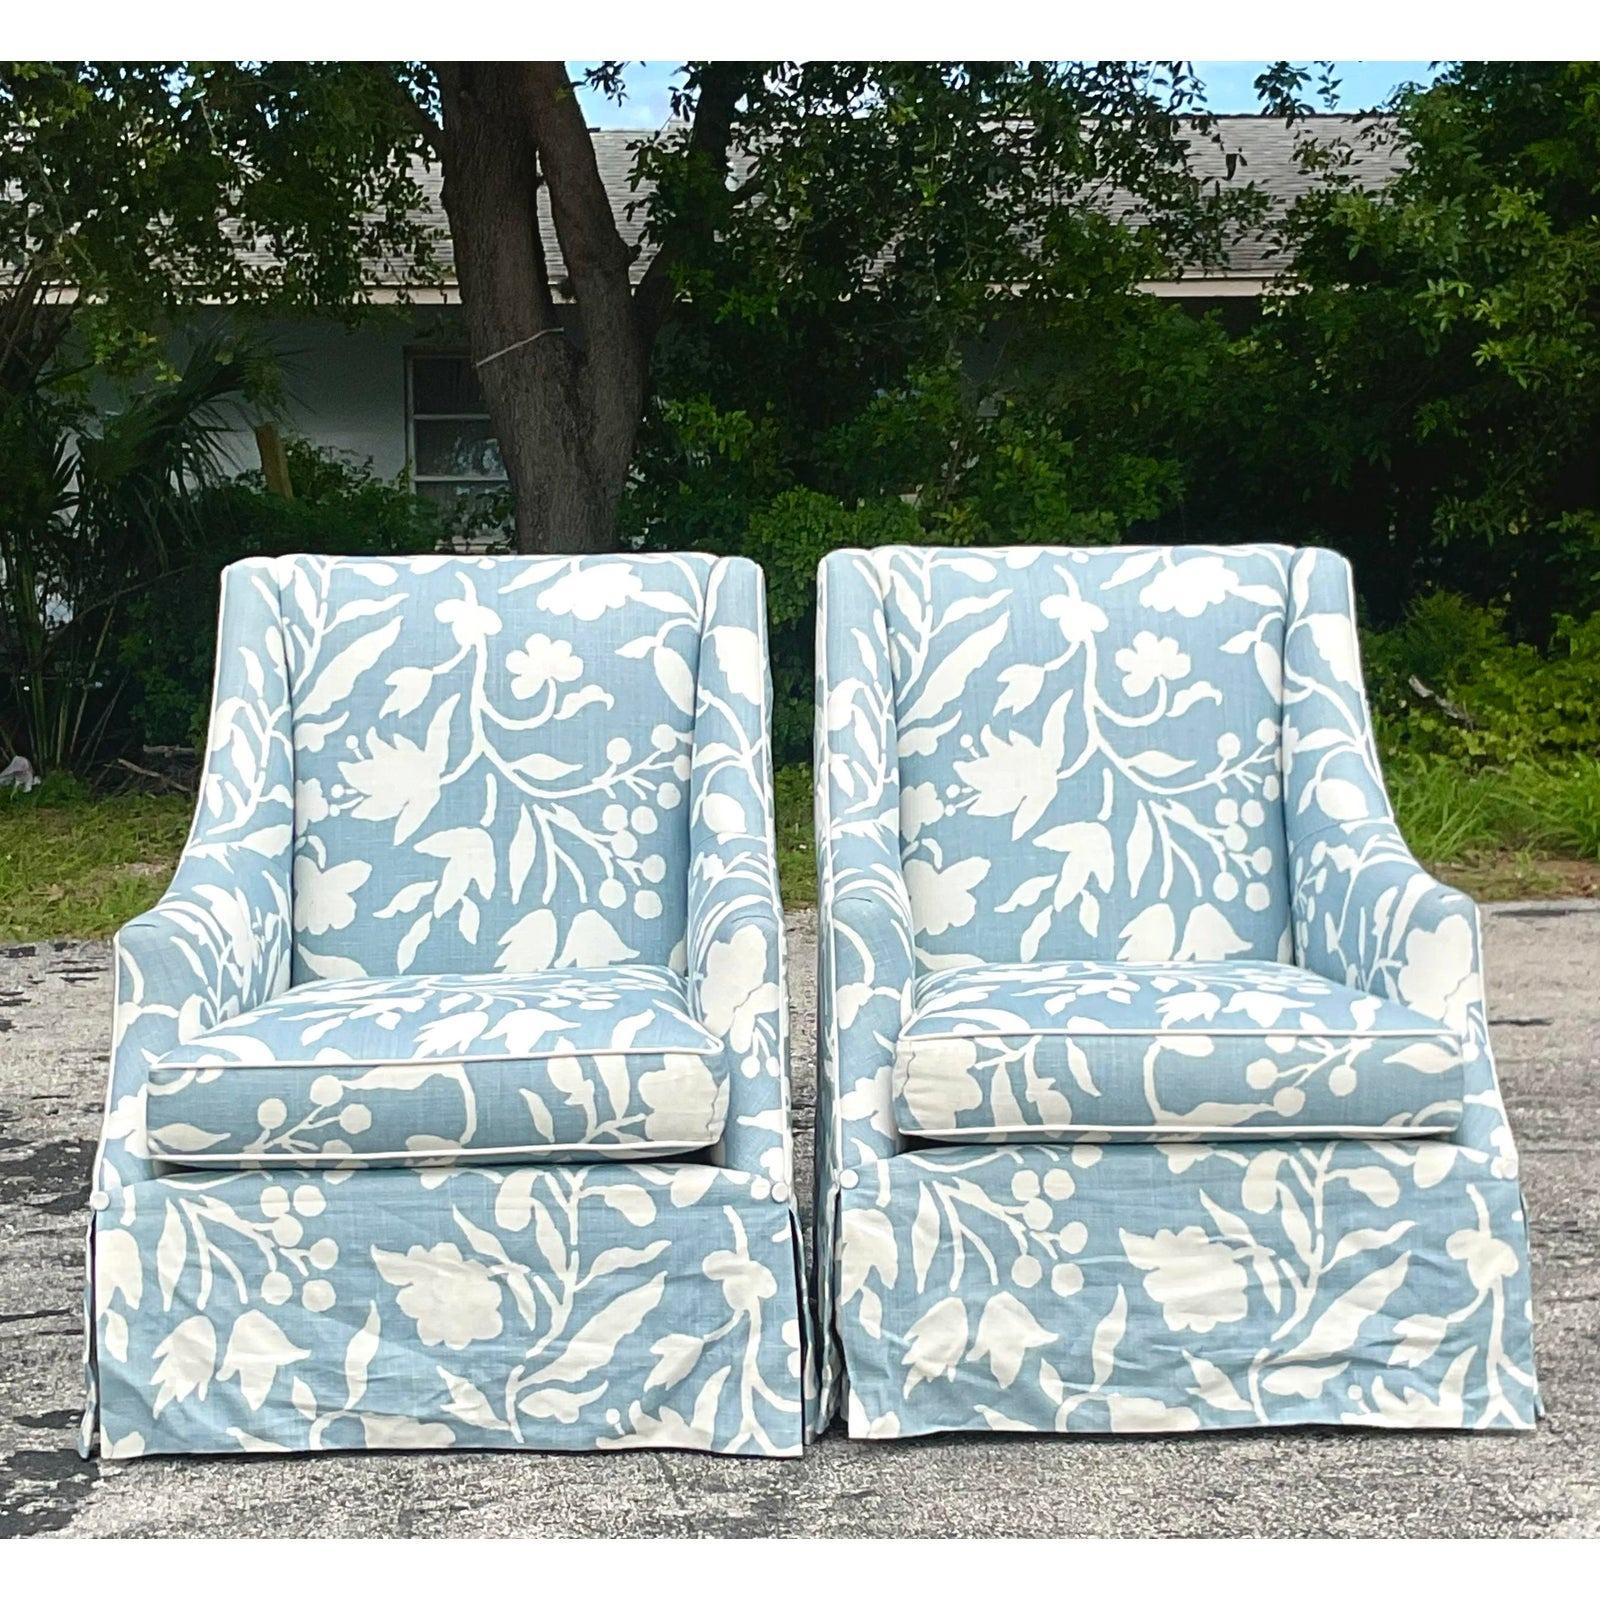 Contemporary Vintage Coastal Cooper Brothers Printed Leaf Lounge Chairs, a Pair